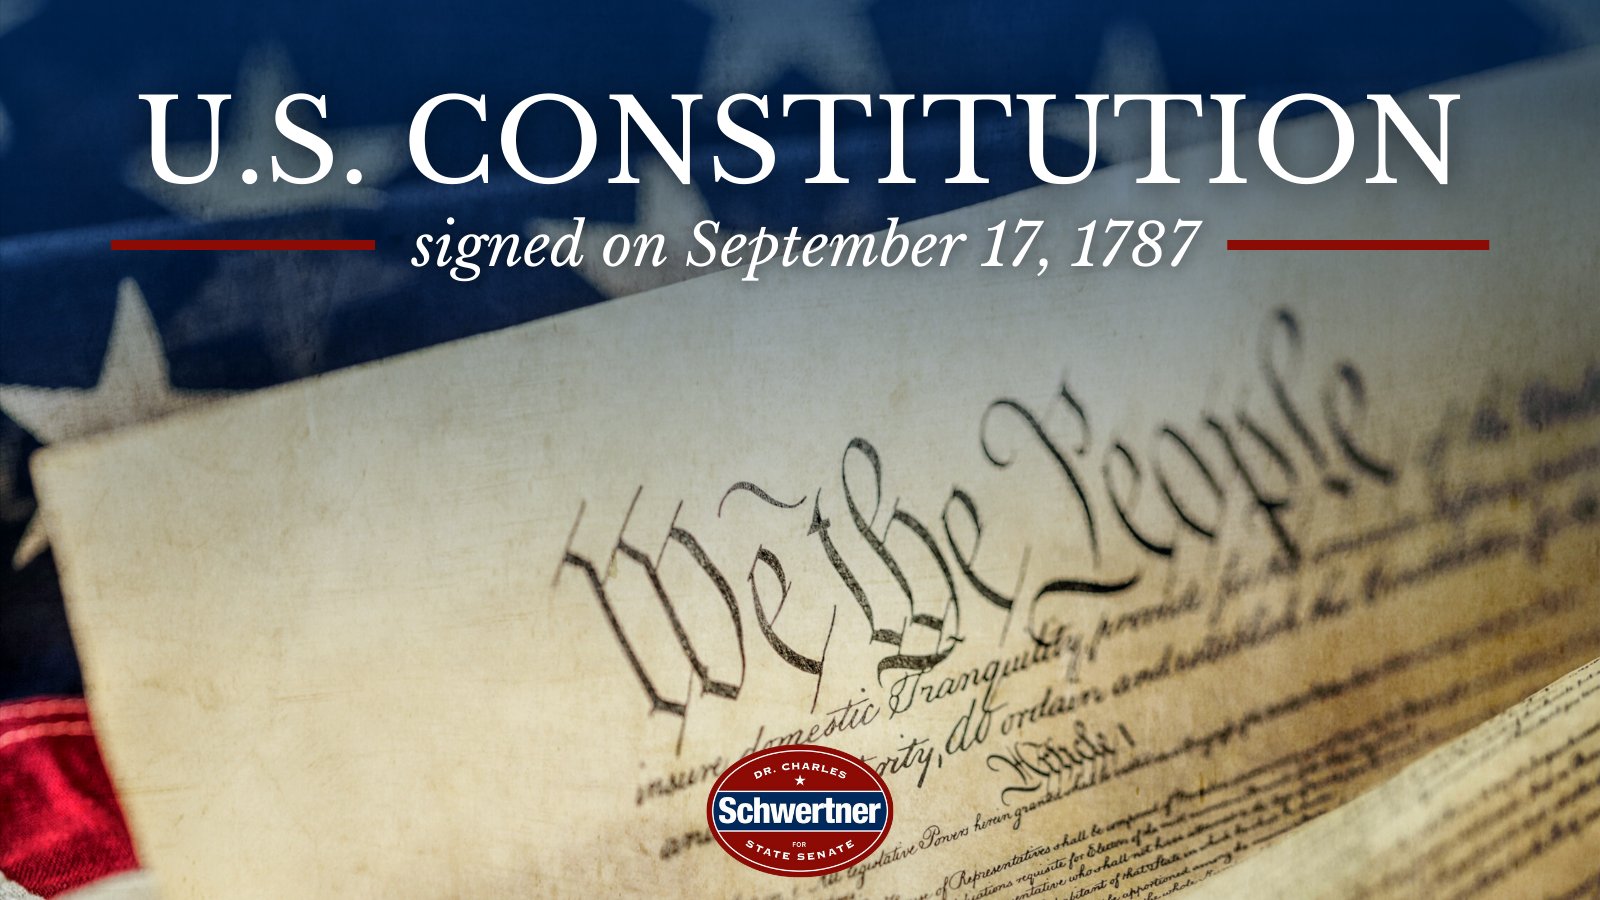 Charles Schwertner on Twitter: "On this day in 1787, the U.S. Constitution was signed at the Constitutional Convention in Philadelphia. Happy #ConstitutionDay! https://t.co/bCFDVA7EdJ" / X